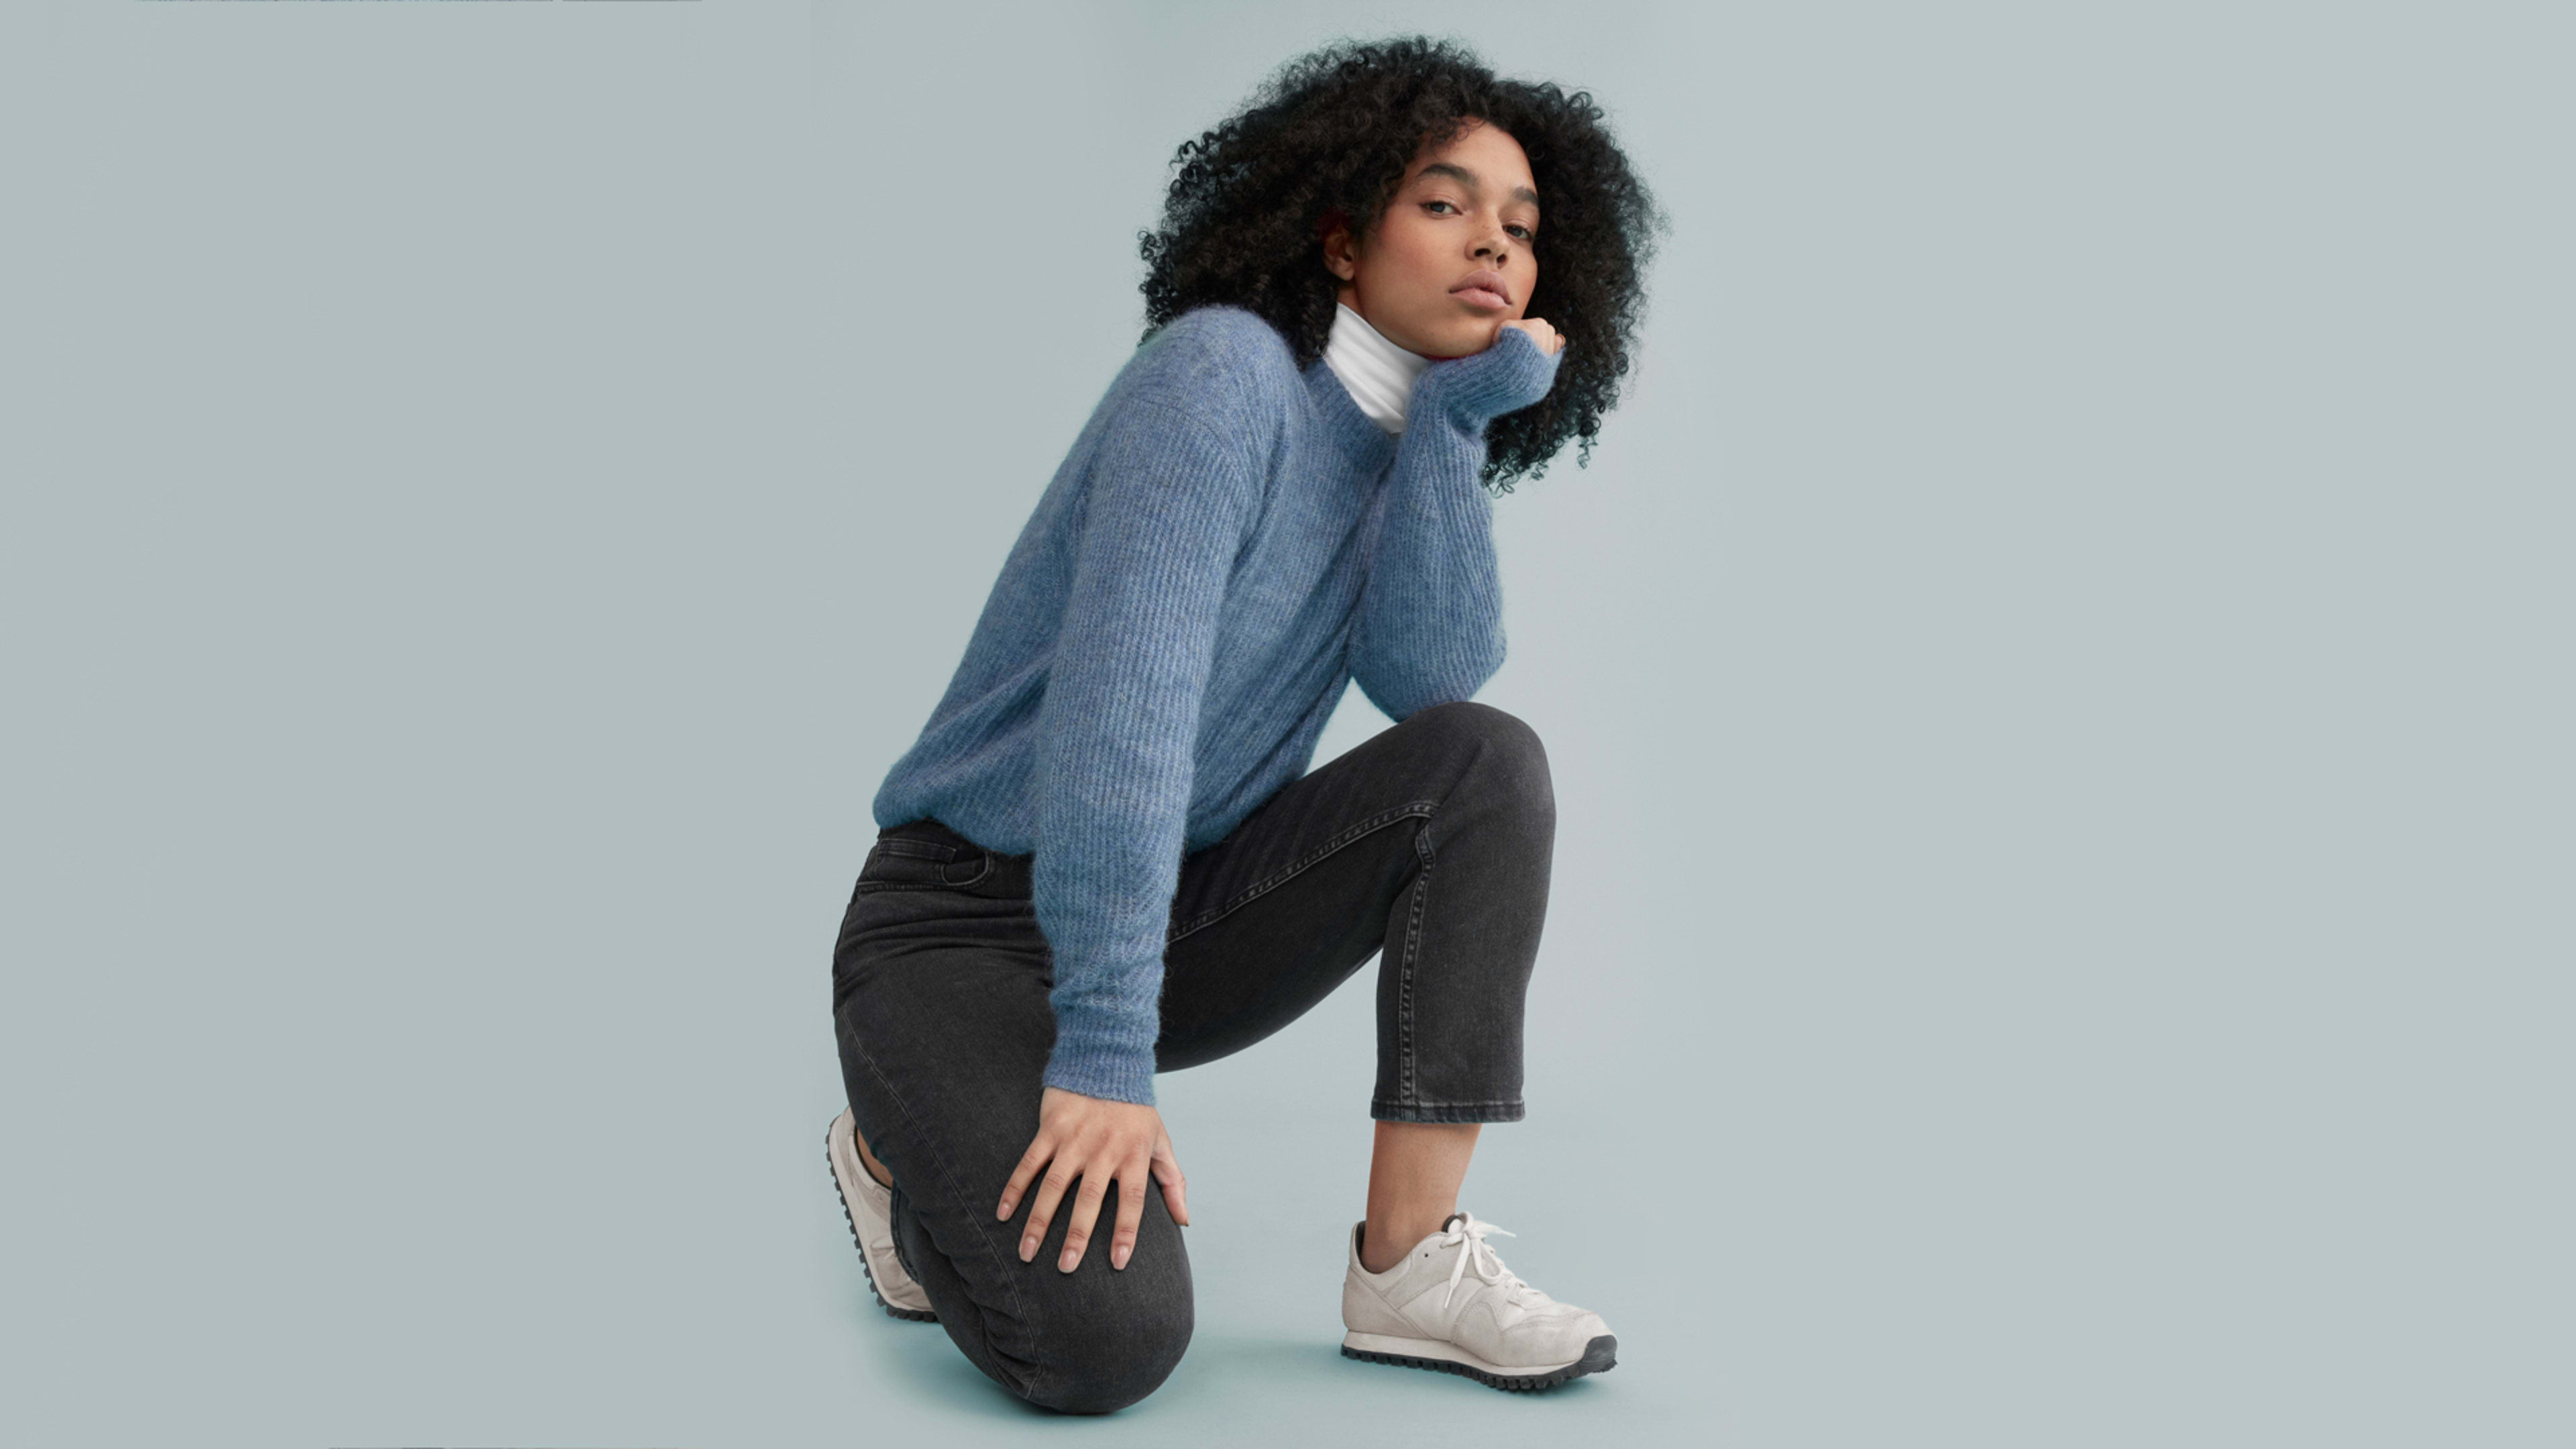 Everlane joins the list of fashion brands that want you to spend more than you have